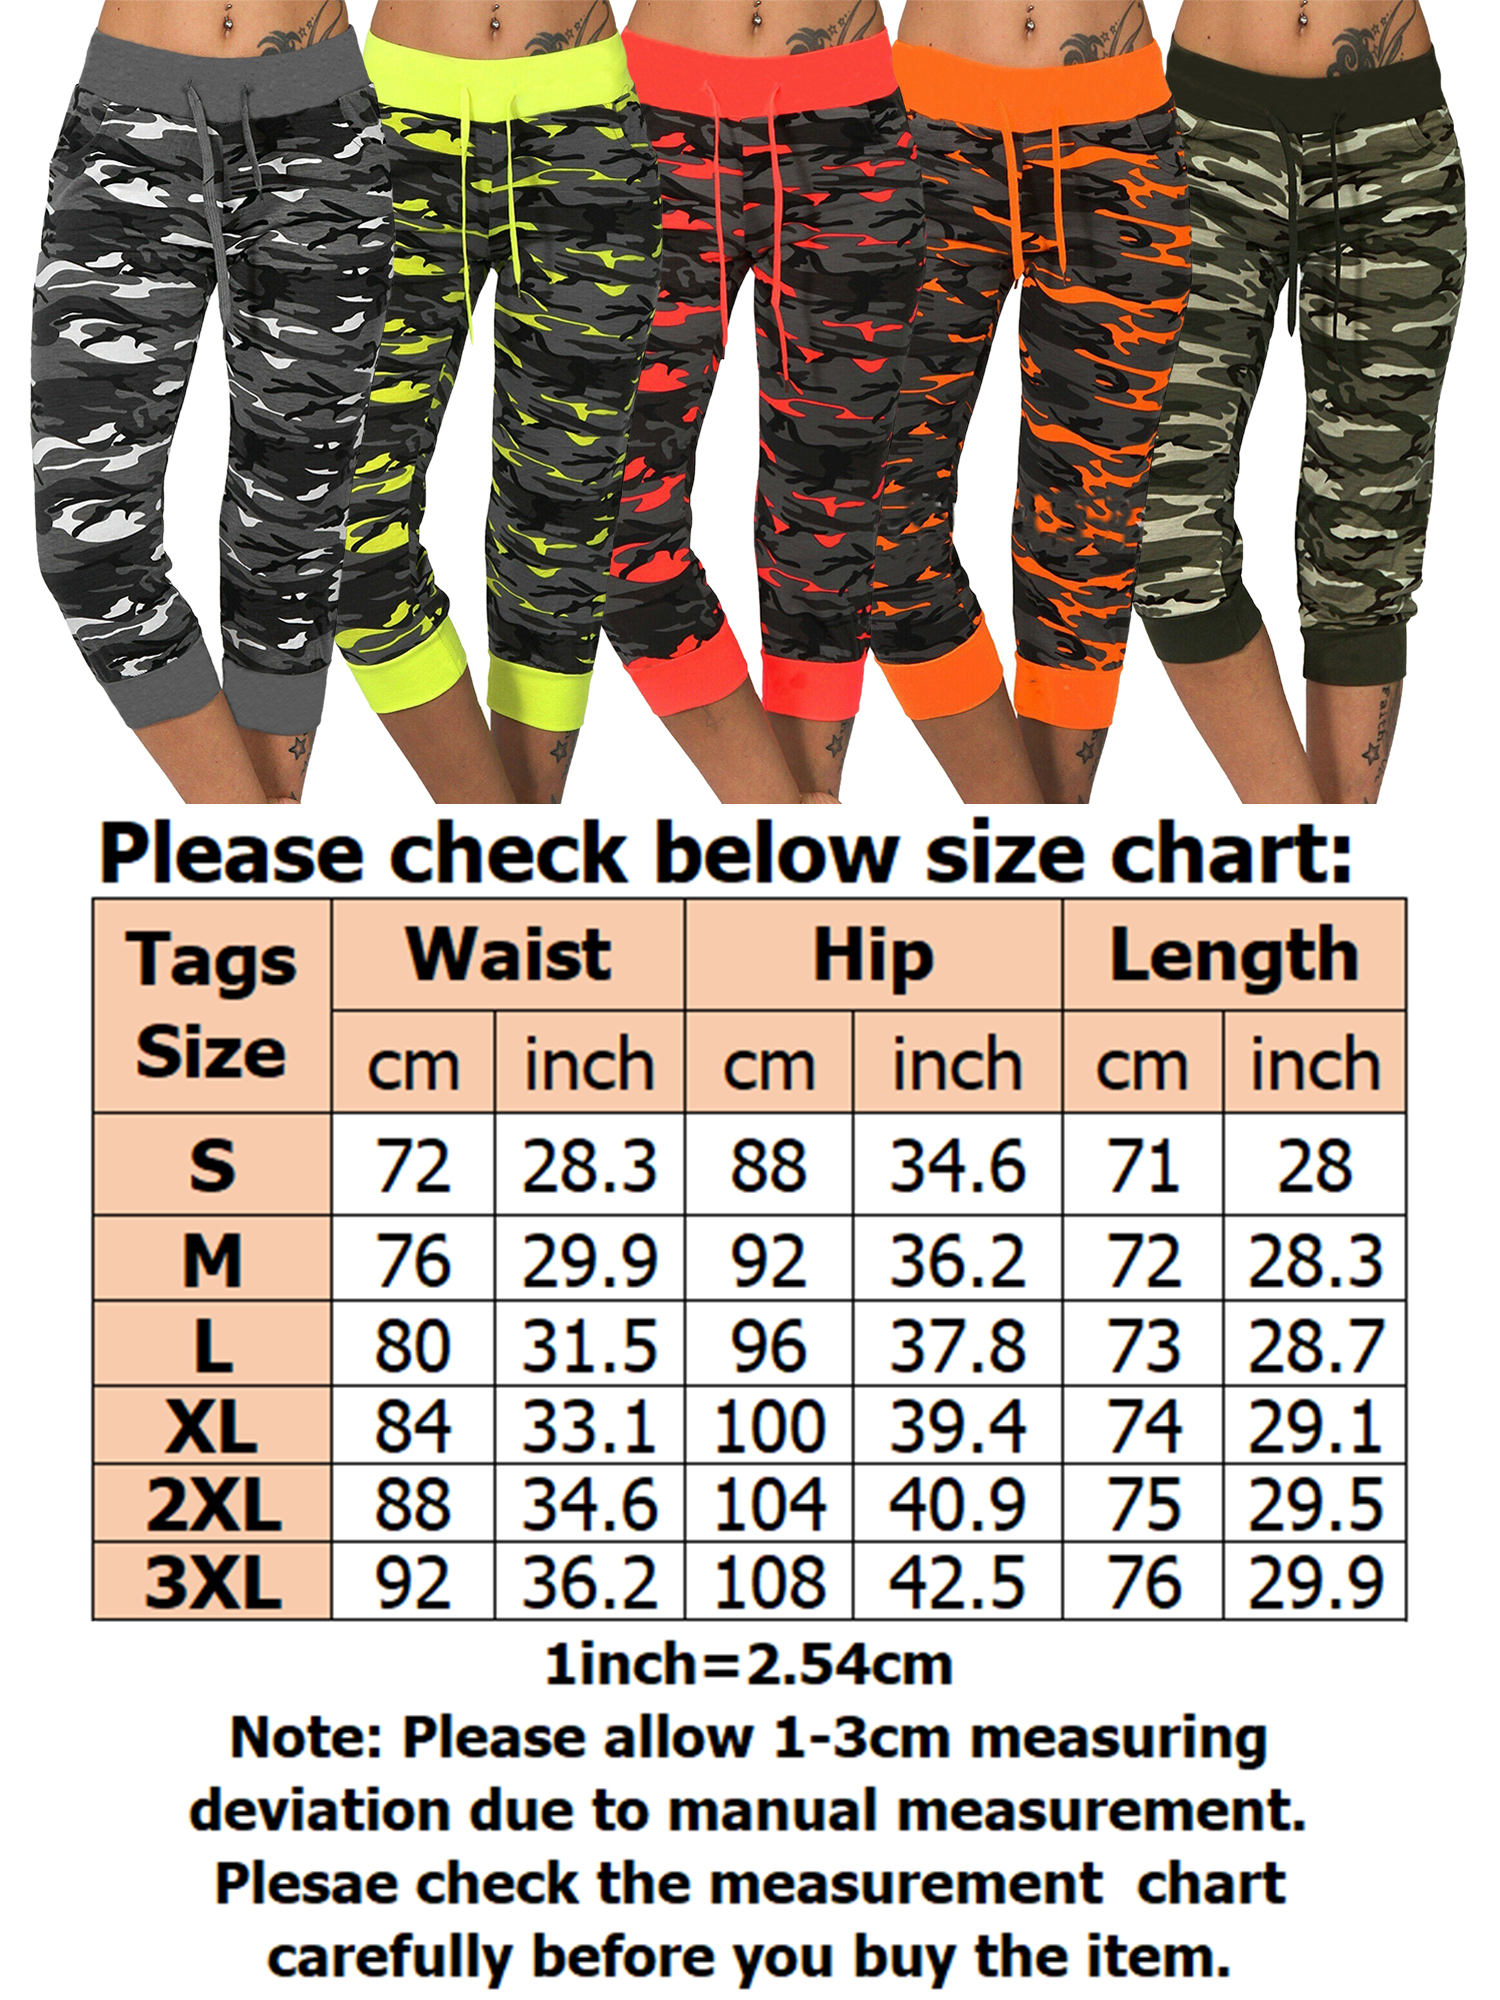 (2 Packs) Juniors' Plus Size Camo Sports Yoga Crop Jeggings High Waist Tummy Control Oversized Camouflage Pants - image 2 of 5